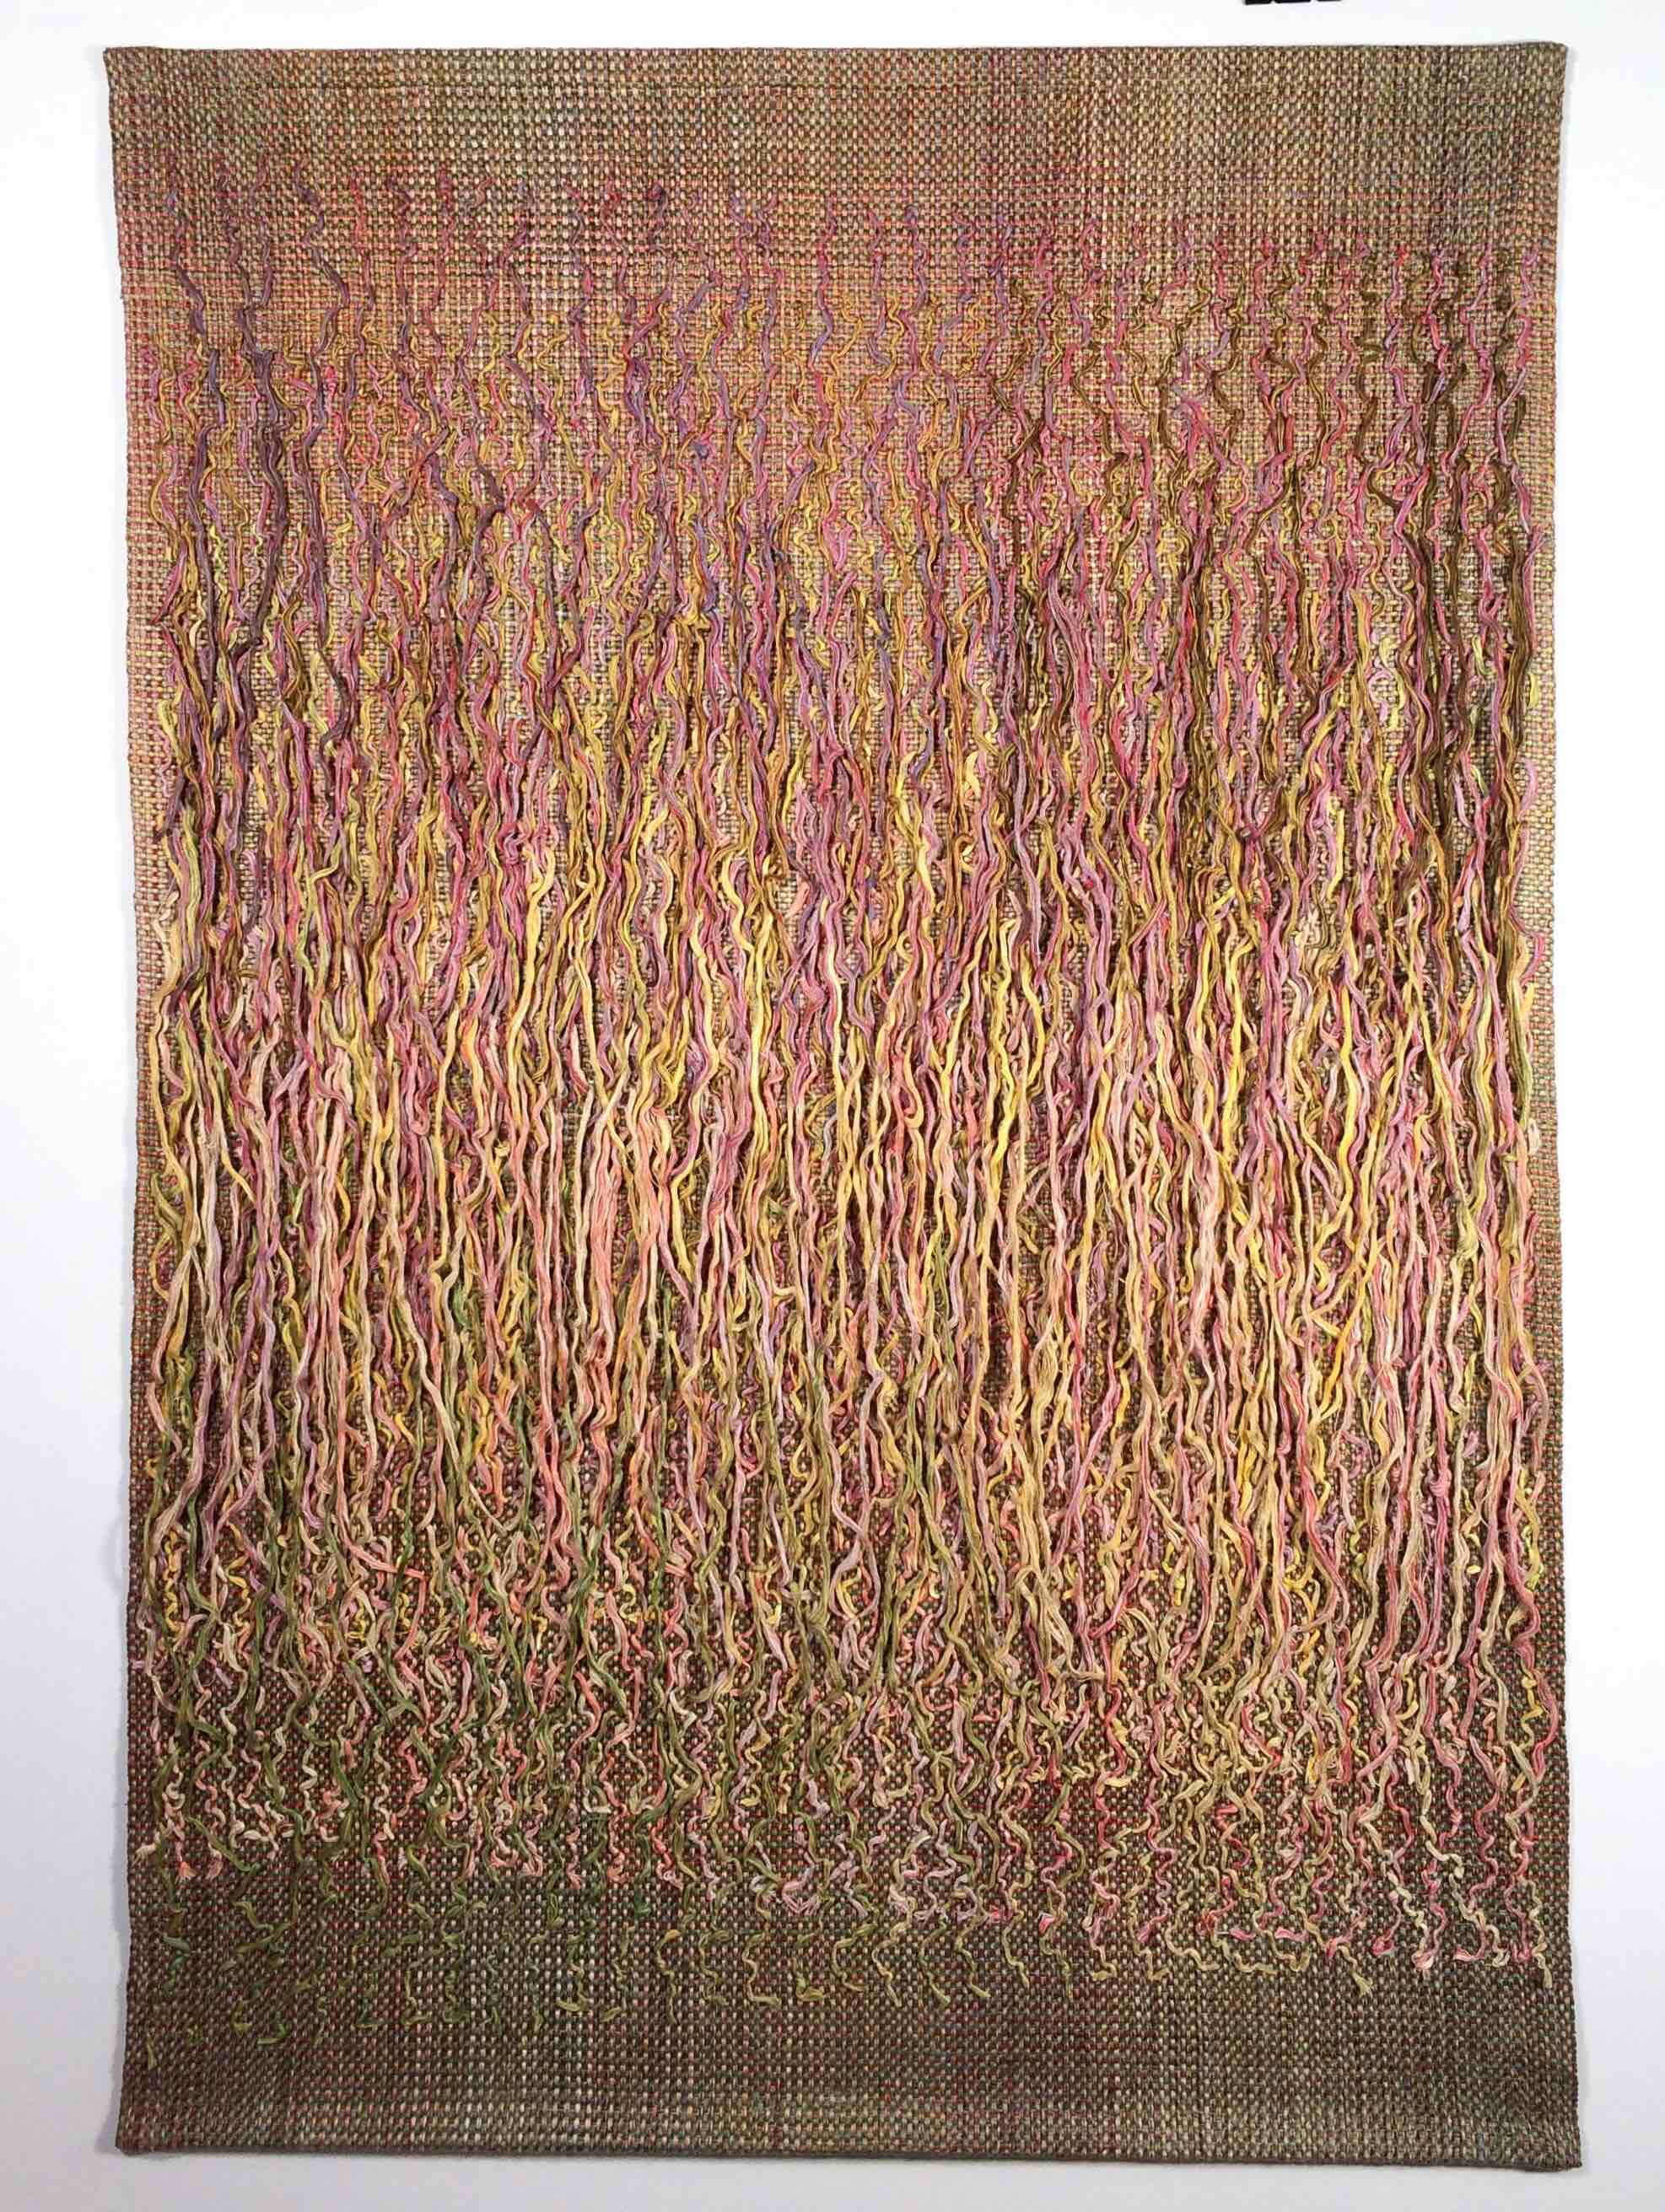    Early Spring     30” x 44”    Linen    2021  